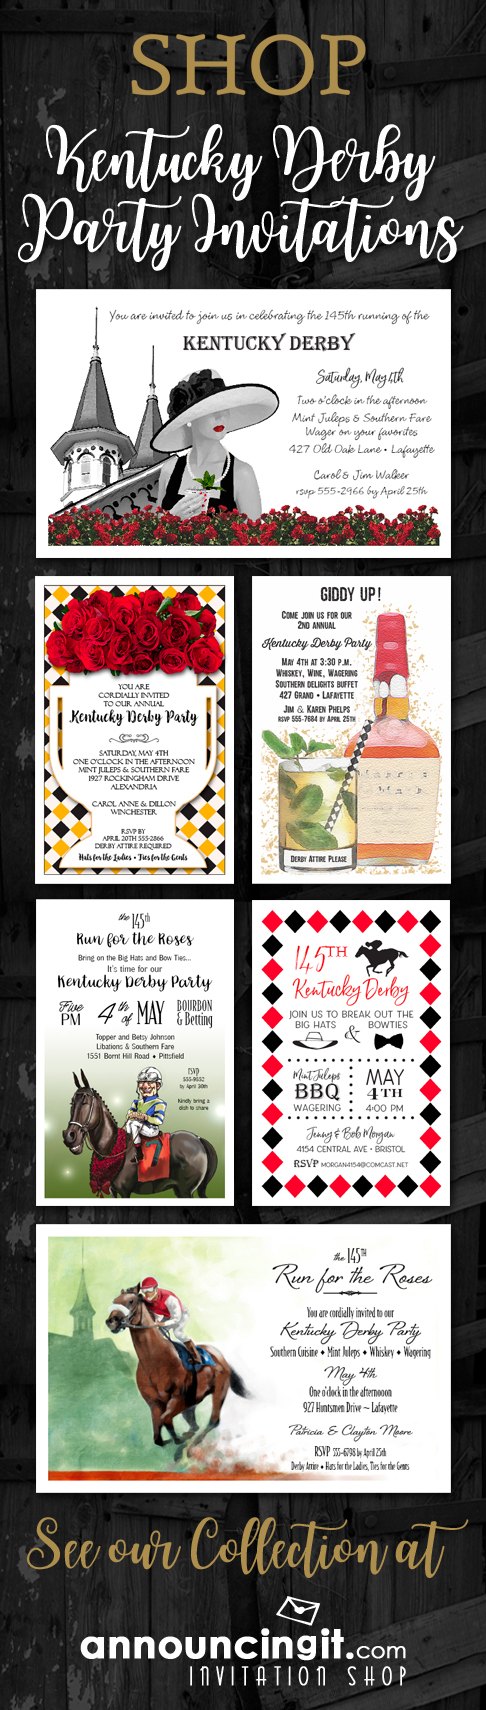 Shop Kentucky Derby Party Invitations